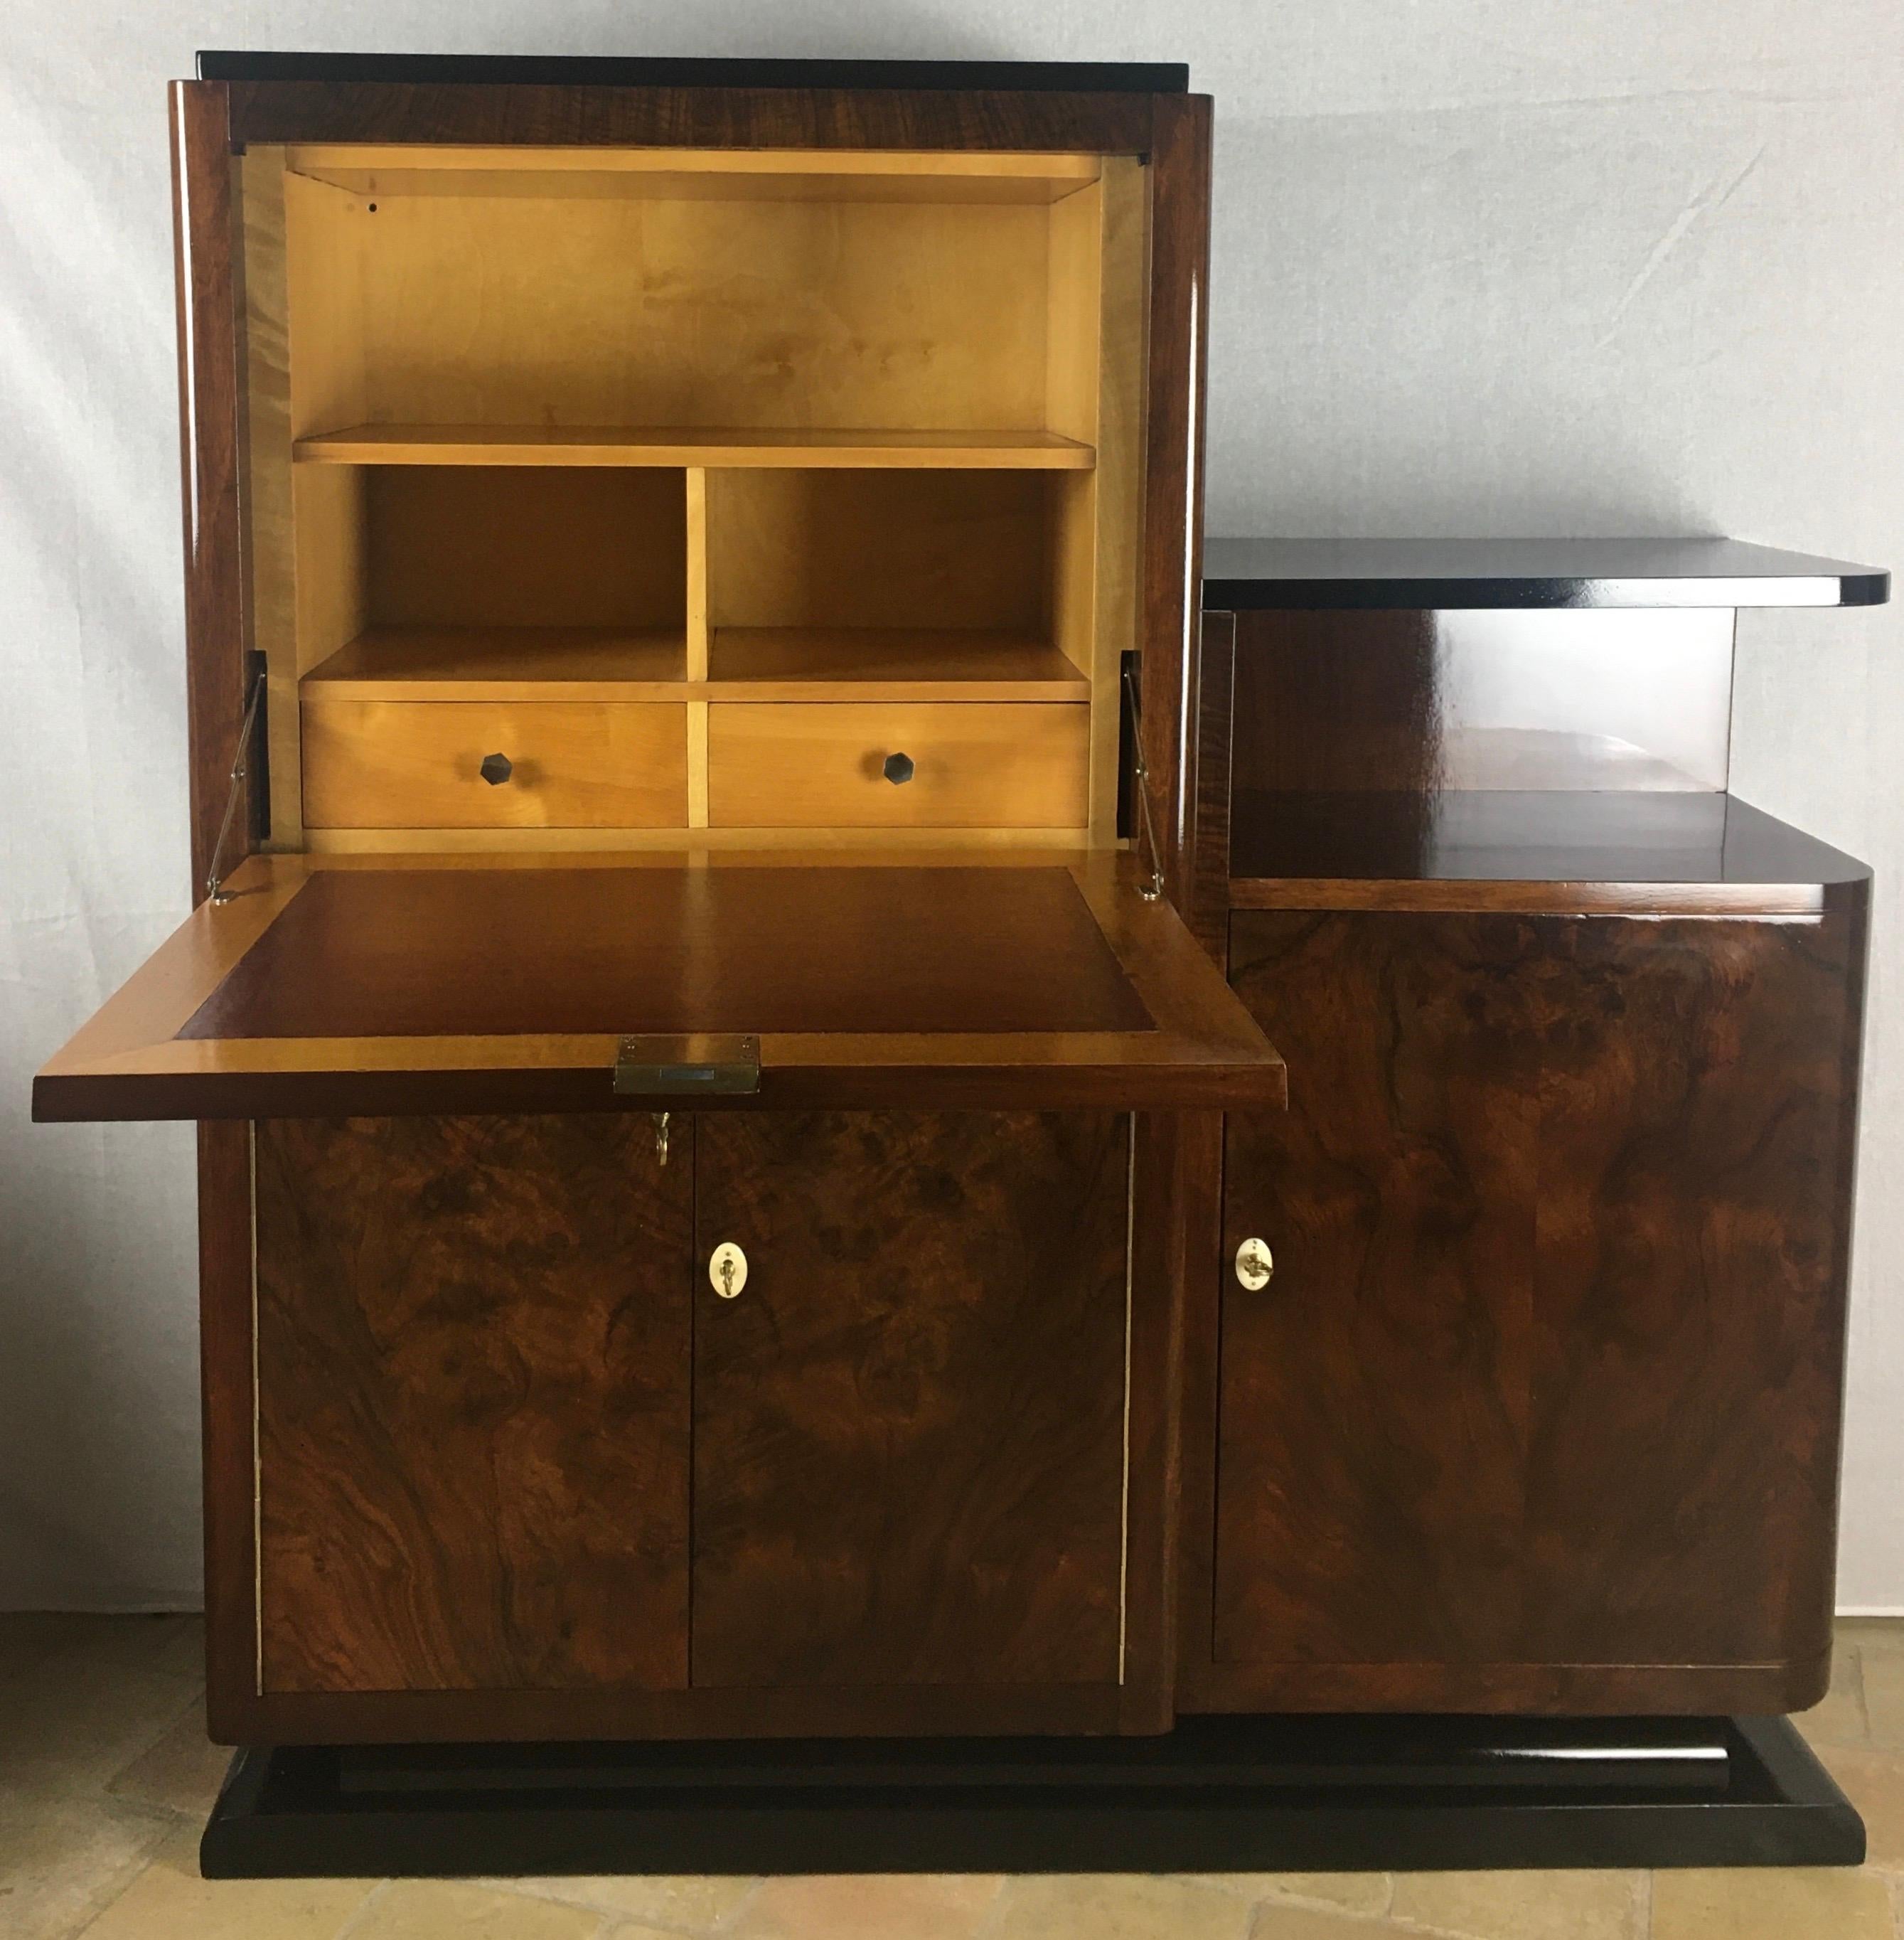 A truly rare and stunning French Art Deco two-tiered secretary desk. Originates from Nancy, France where in the height of the movement circa 1920-1940 most reputable furniture makers established their businesses.

This secretary makes a wonderful